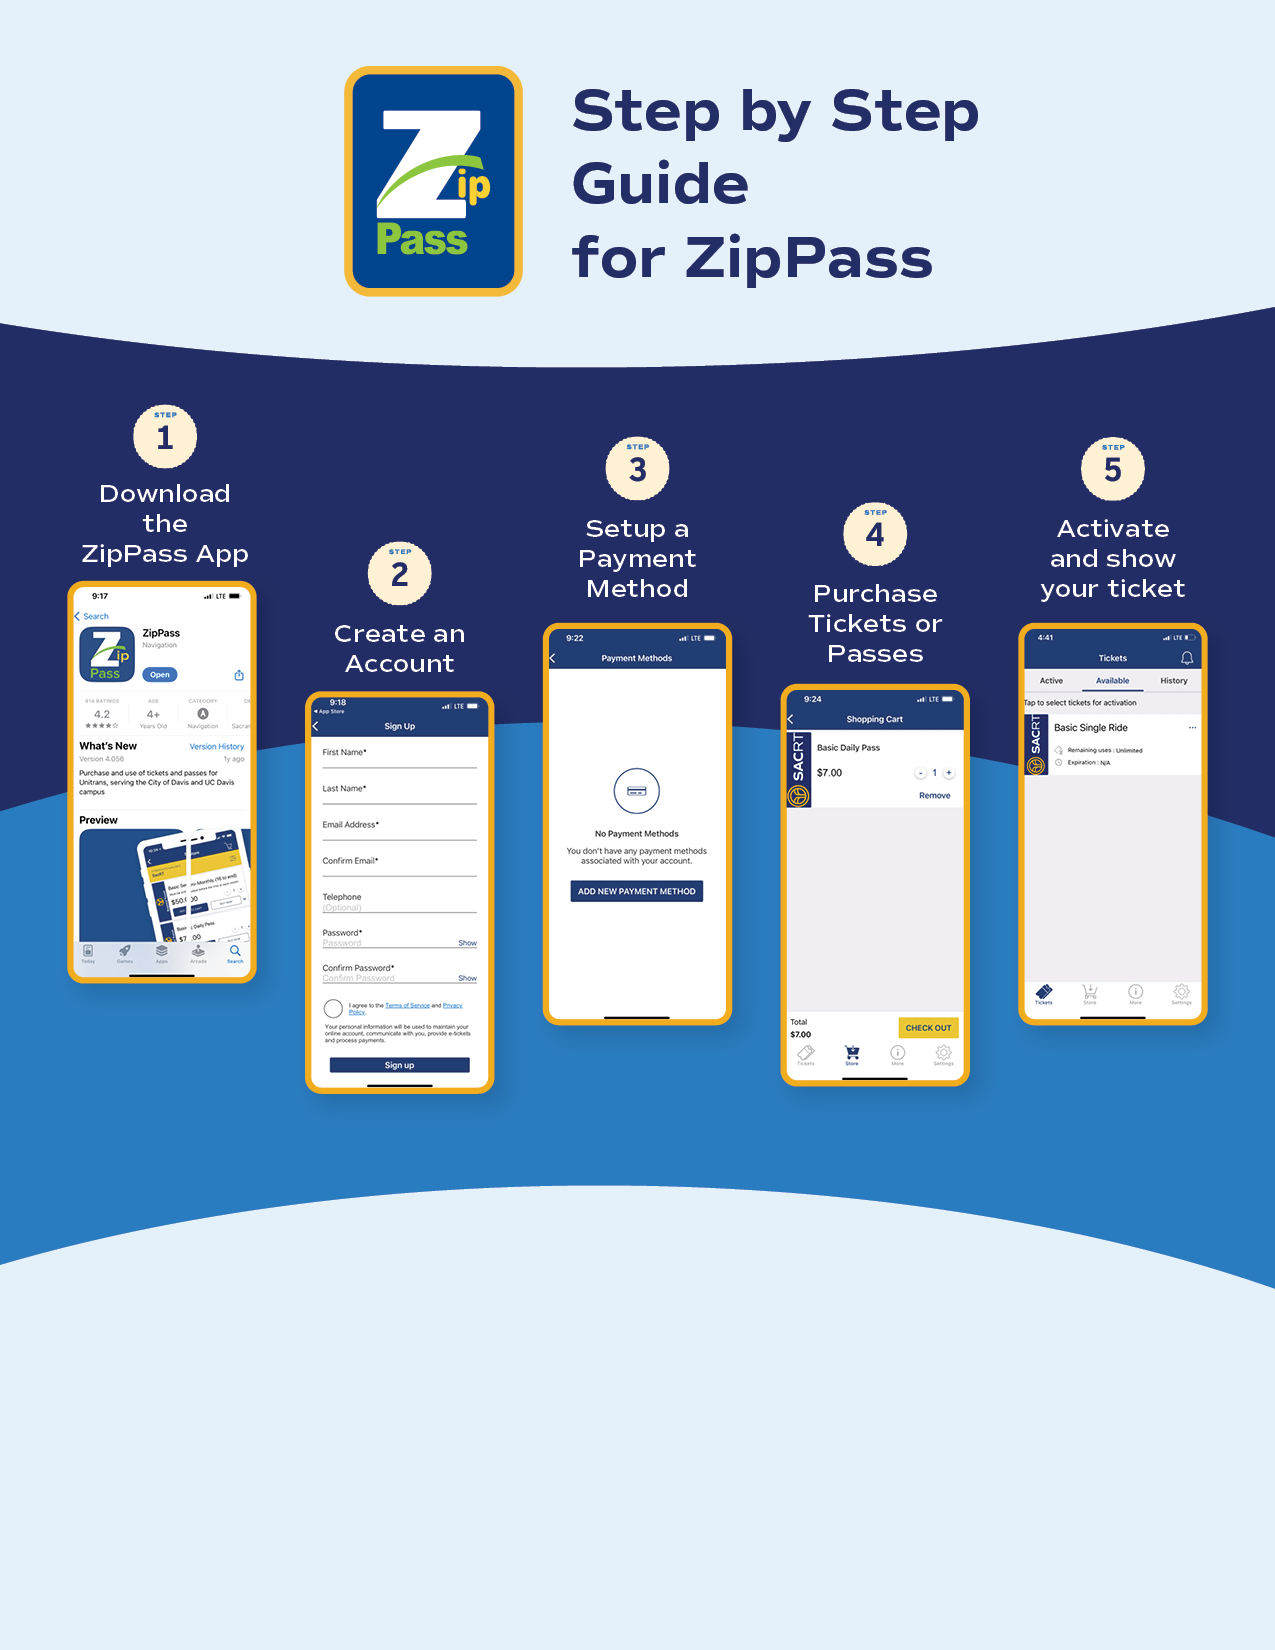 Step by Step Guide for ZipPass